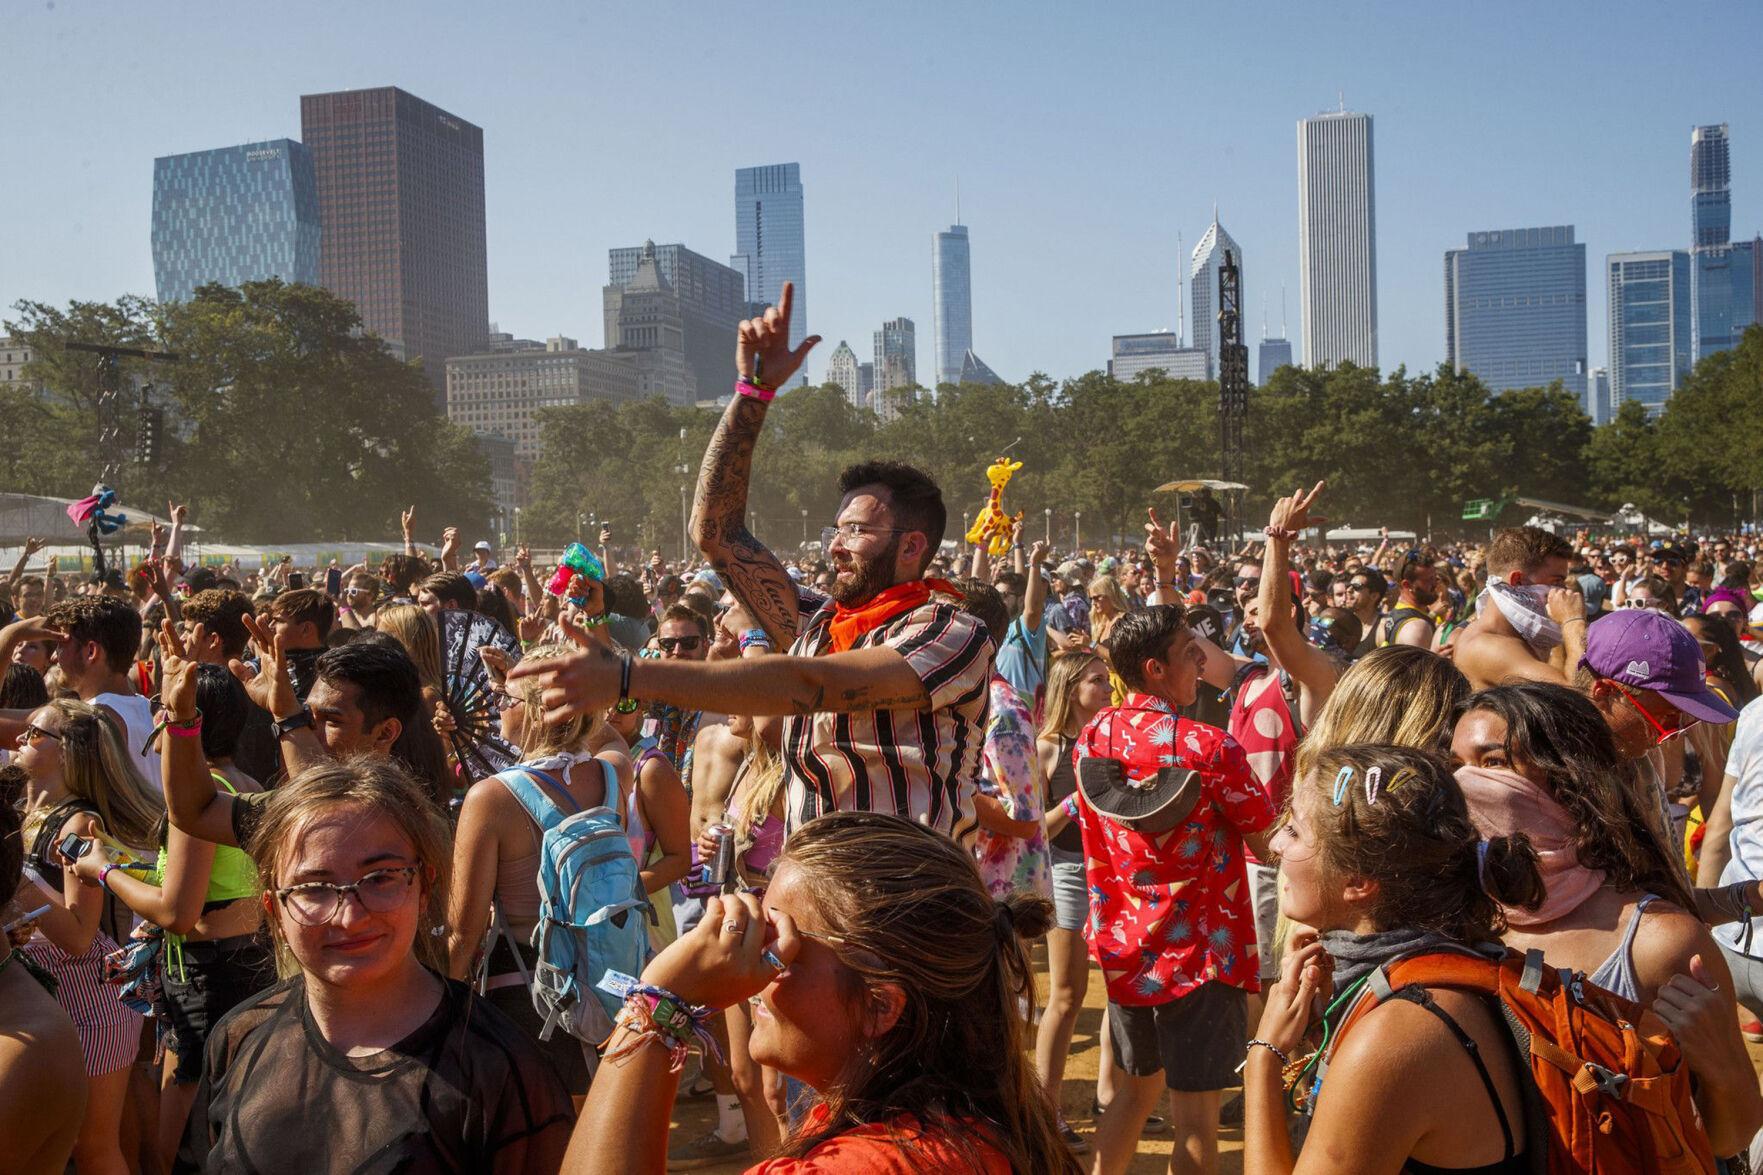 Eight Things You Need to Know About Lolla Cashless - Your Chicago Guide